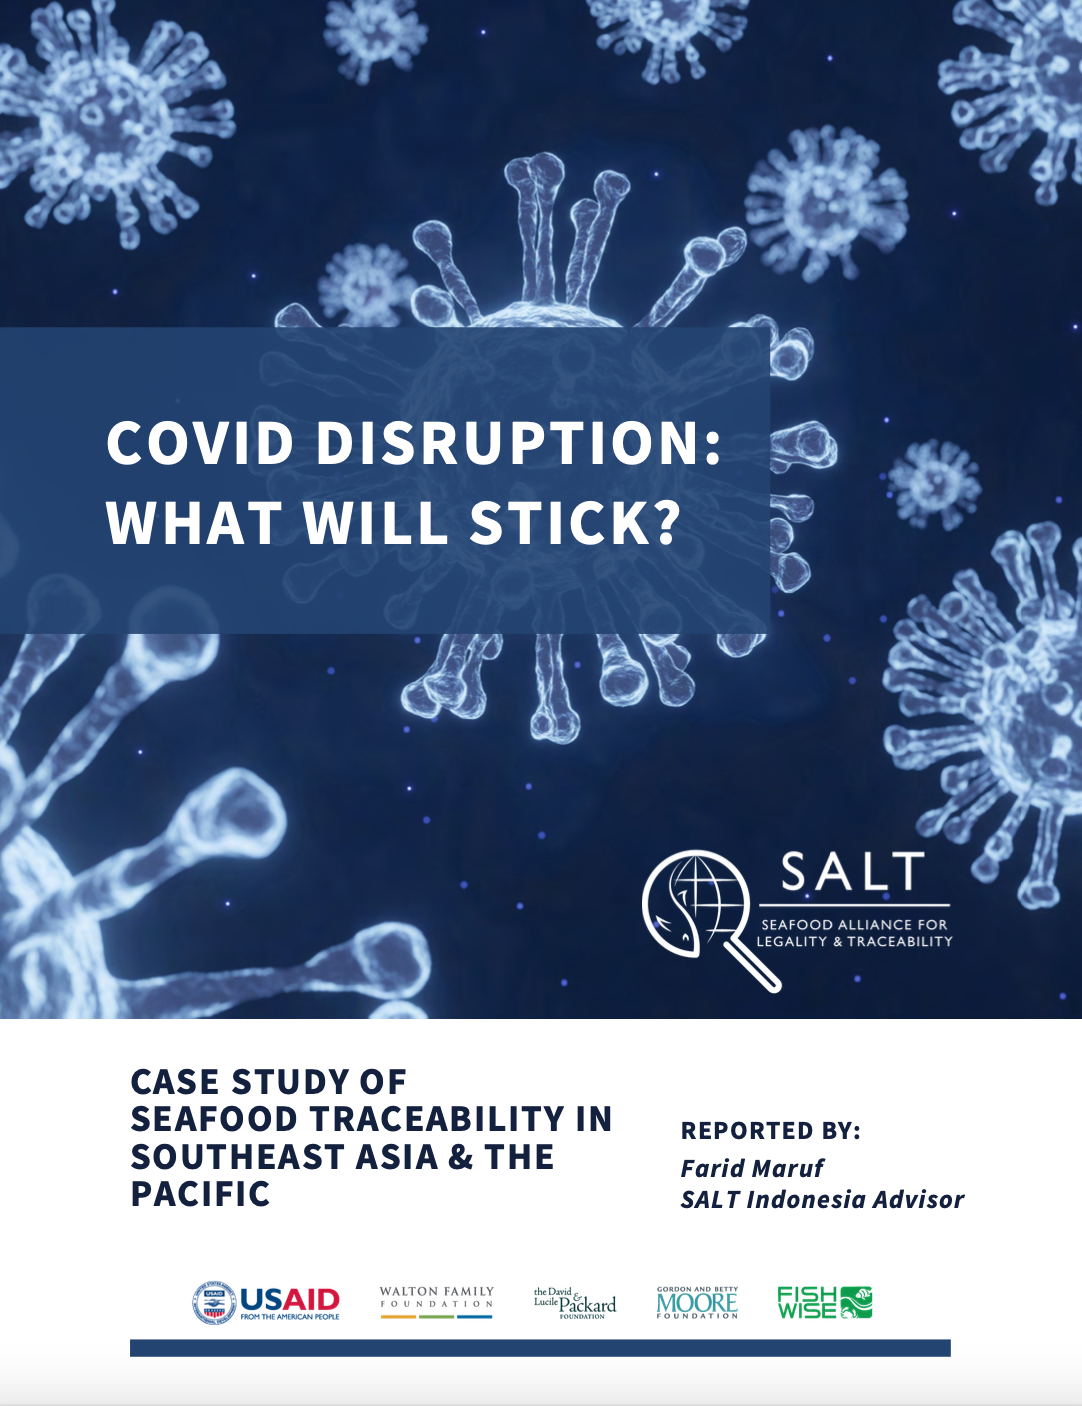 COVID-19 Disruption: What Will Stick? Case Study of Seafood Traceability in Southeast Asia & the Pacific